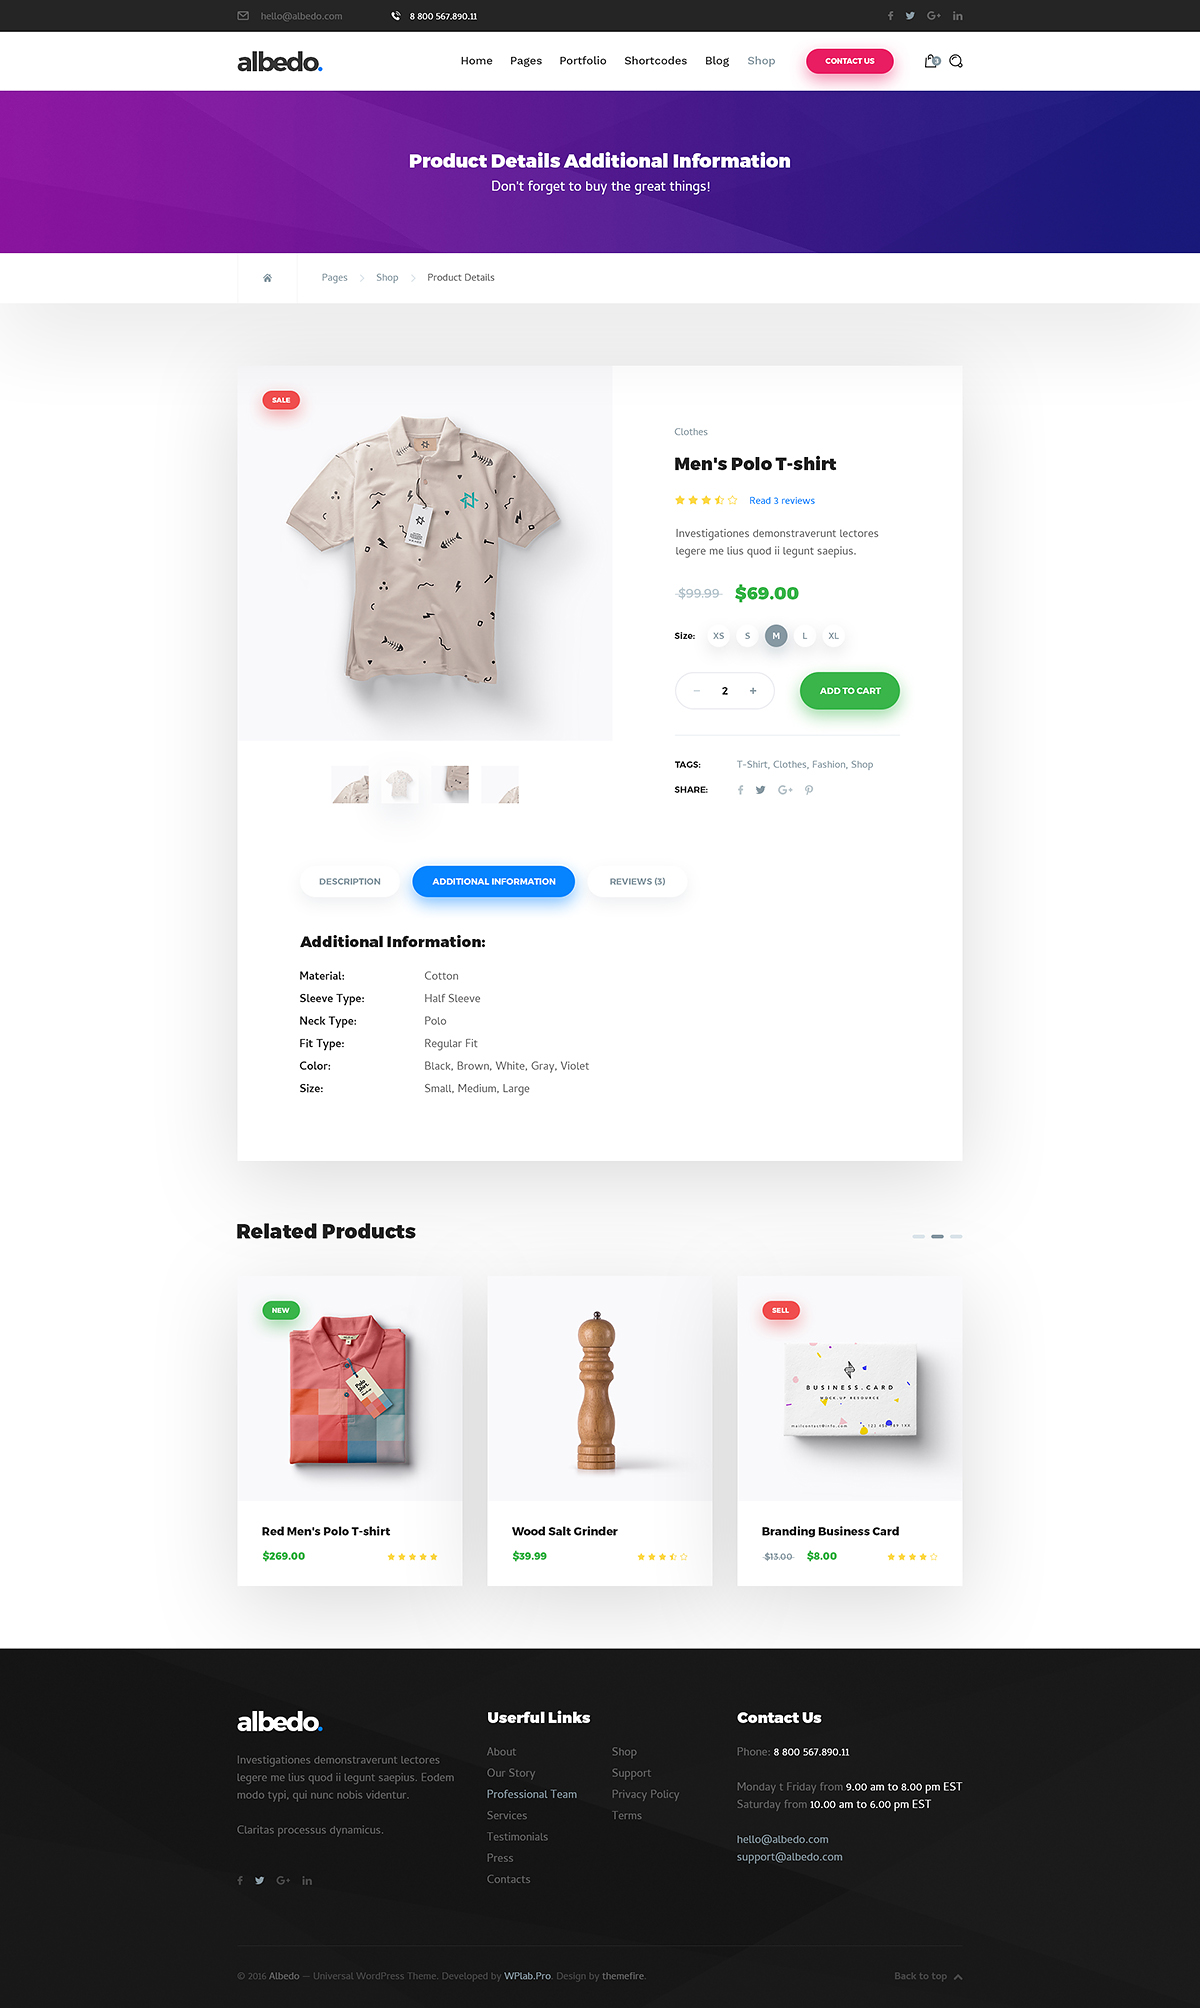 Albedo - Universal and Multipurpose Soft Material PSD Template by themefire